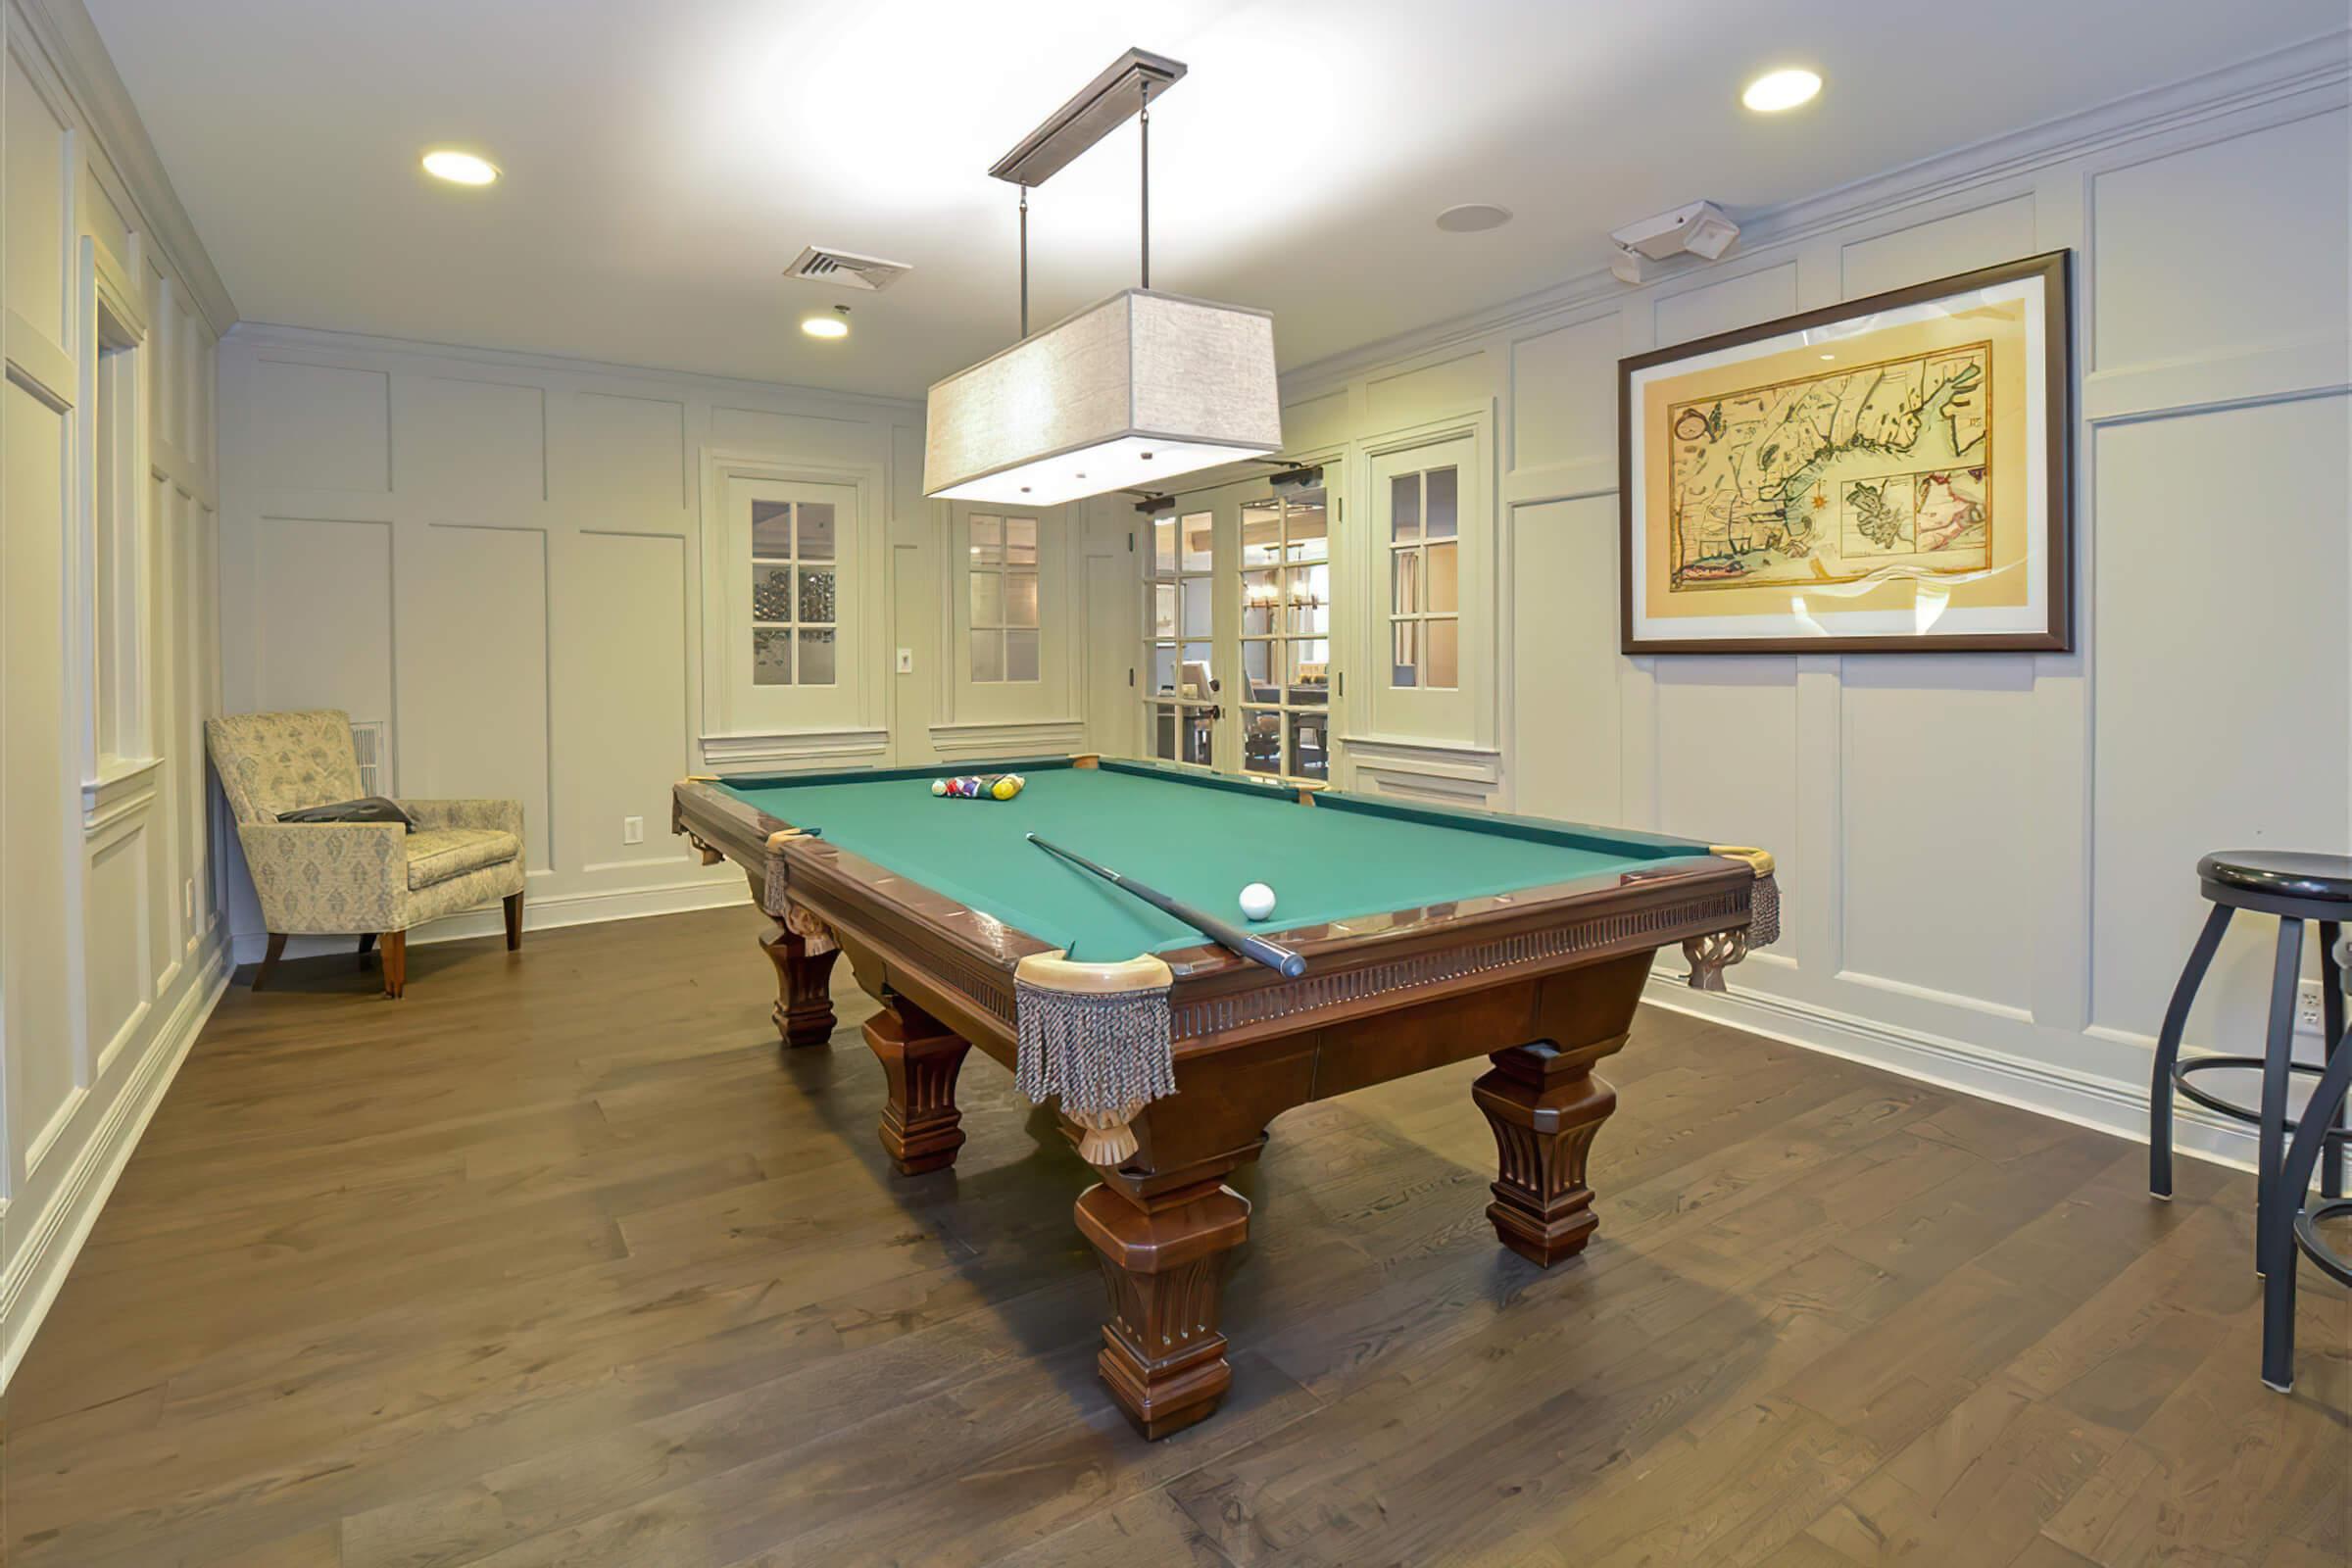 CHALLENGE NEIGHBORS TO A GAME OF BILLIARDS